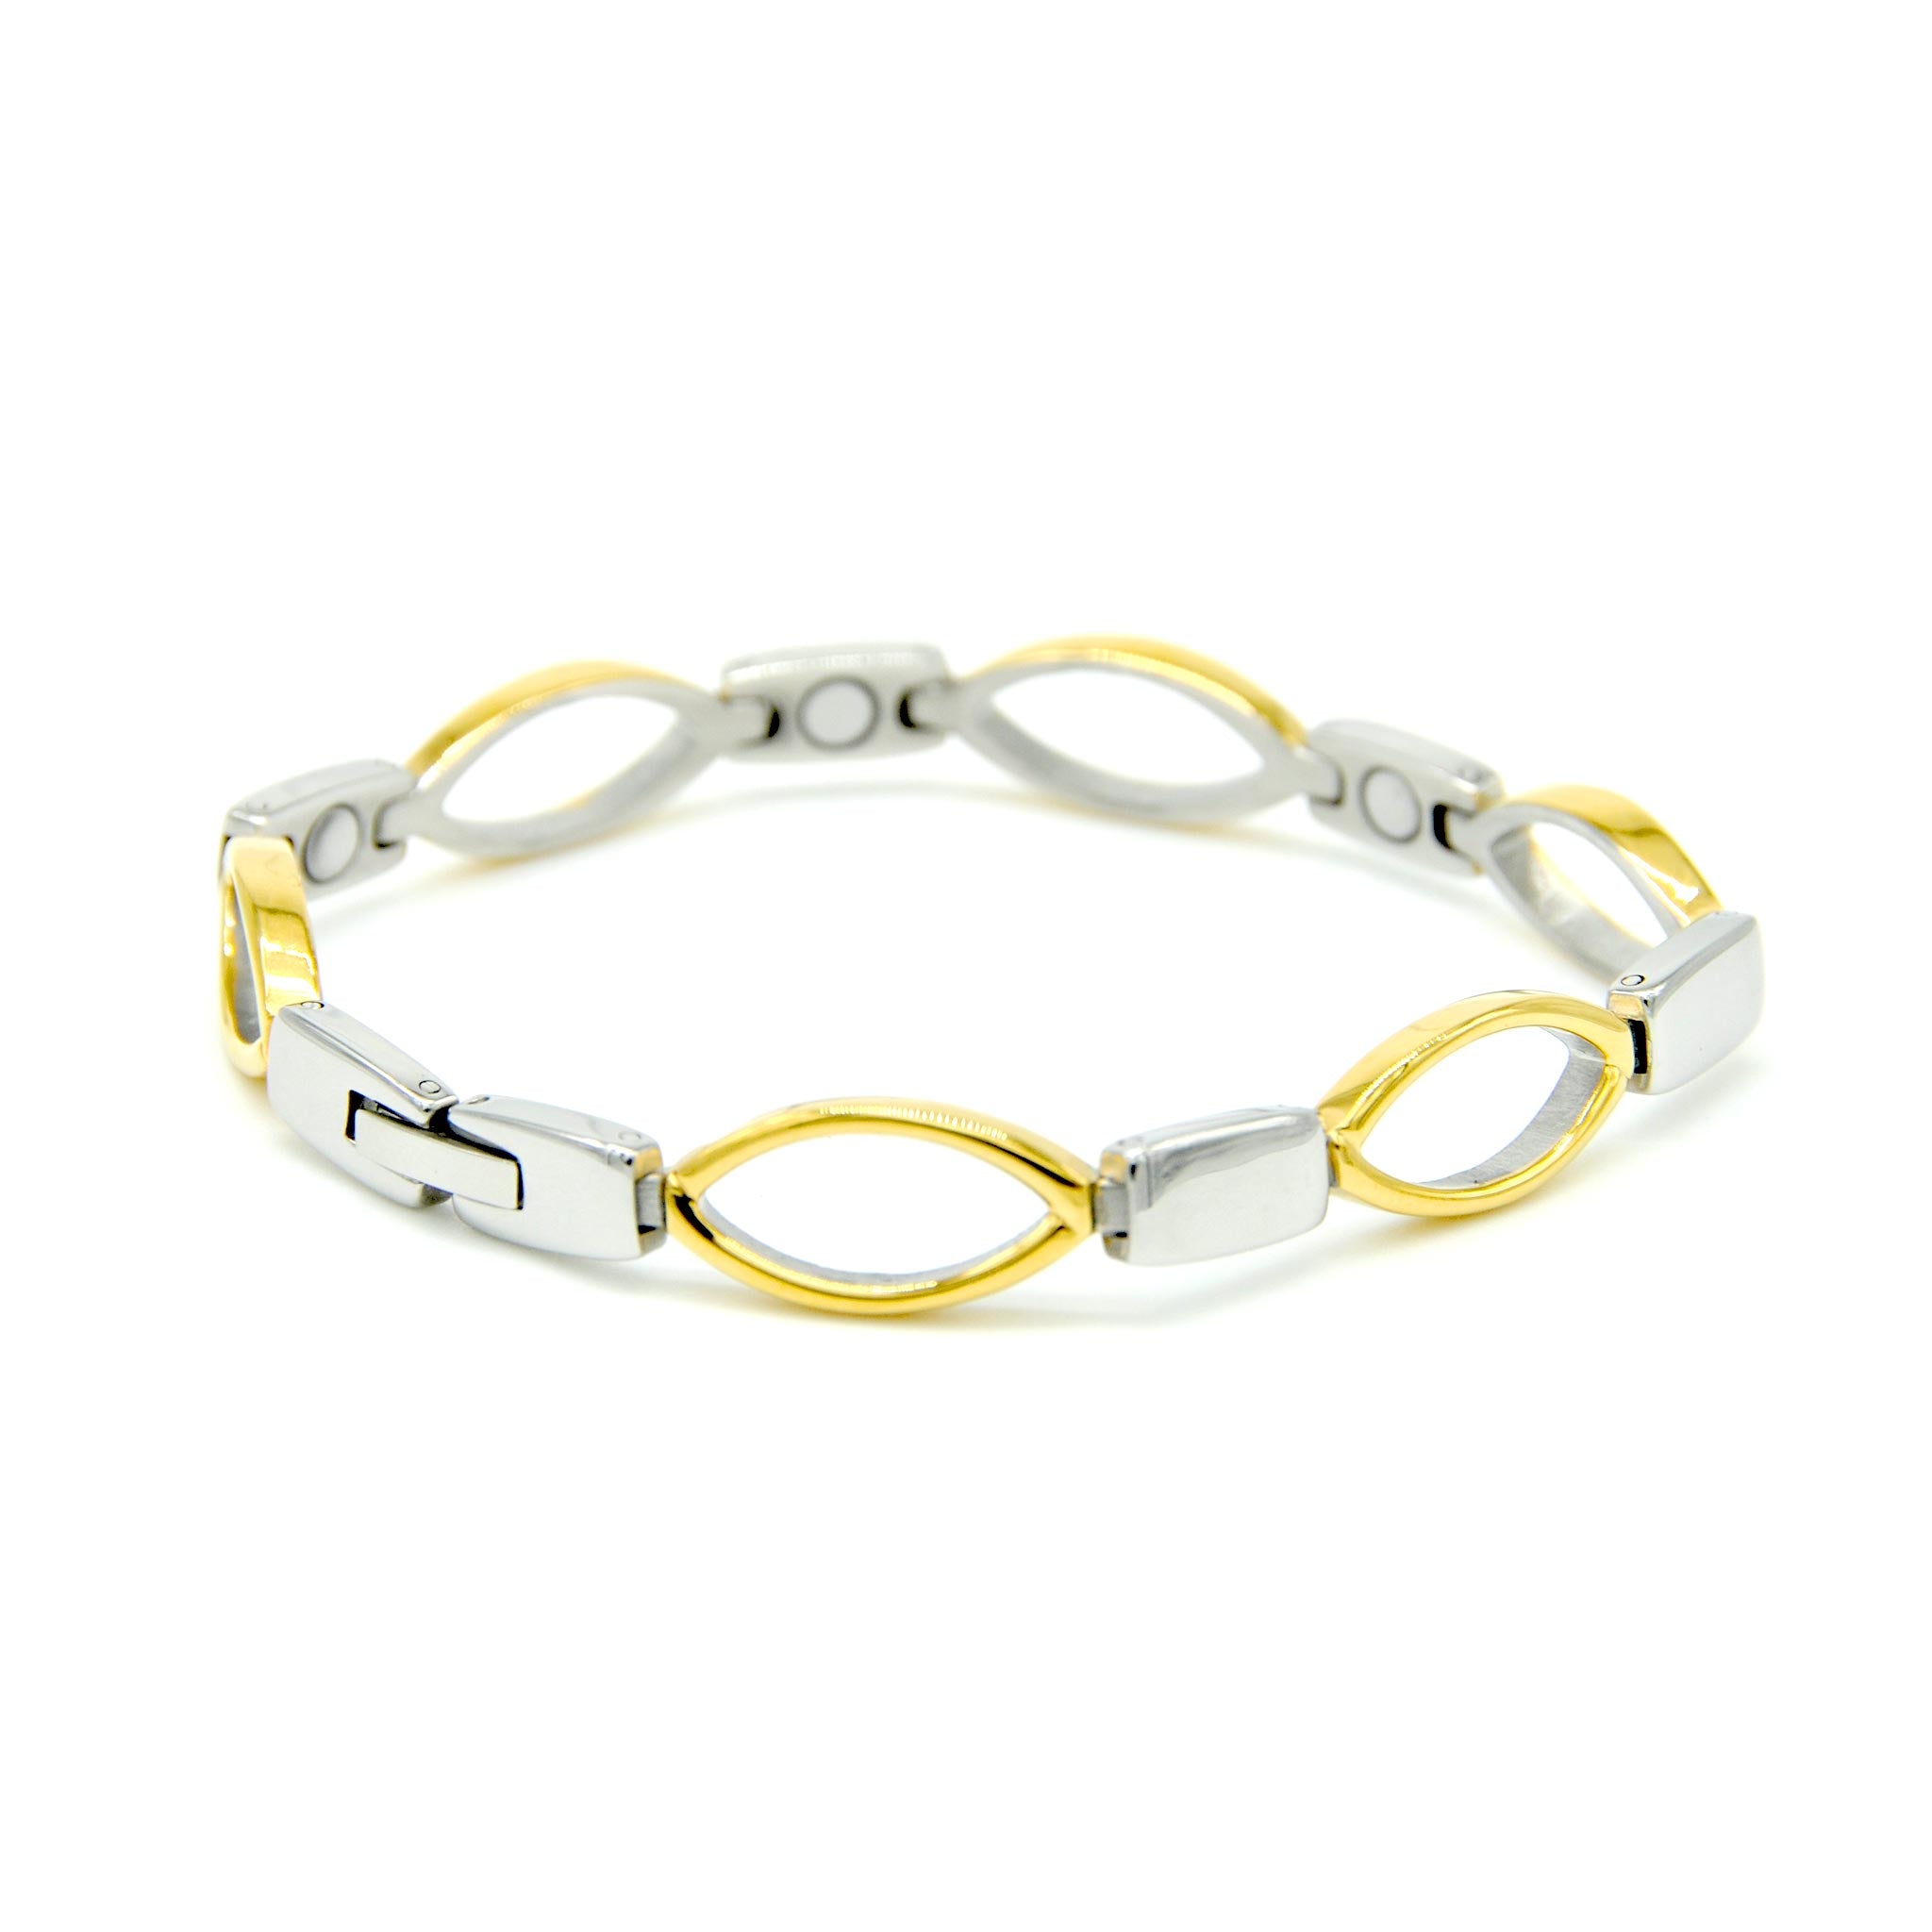 gold and silver bangle